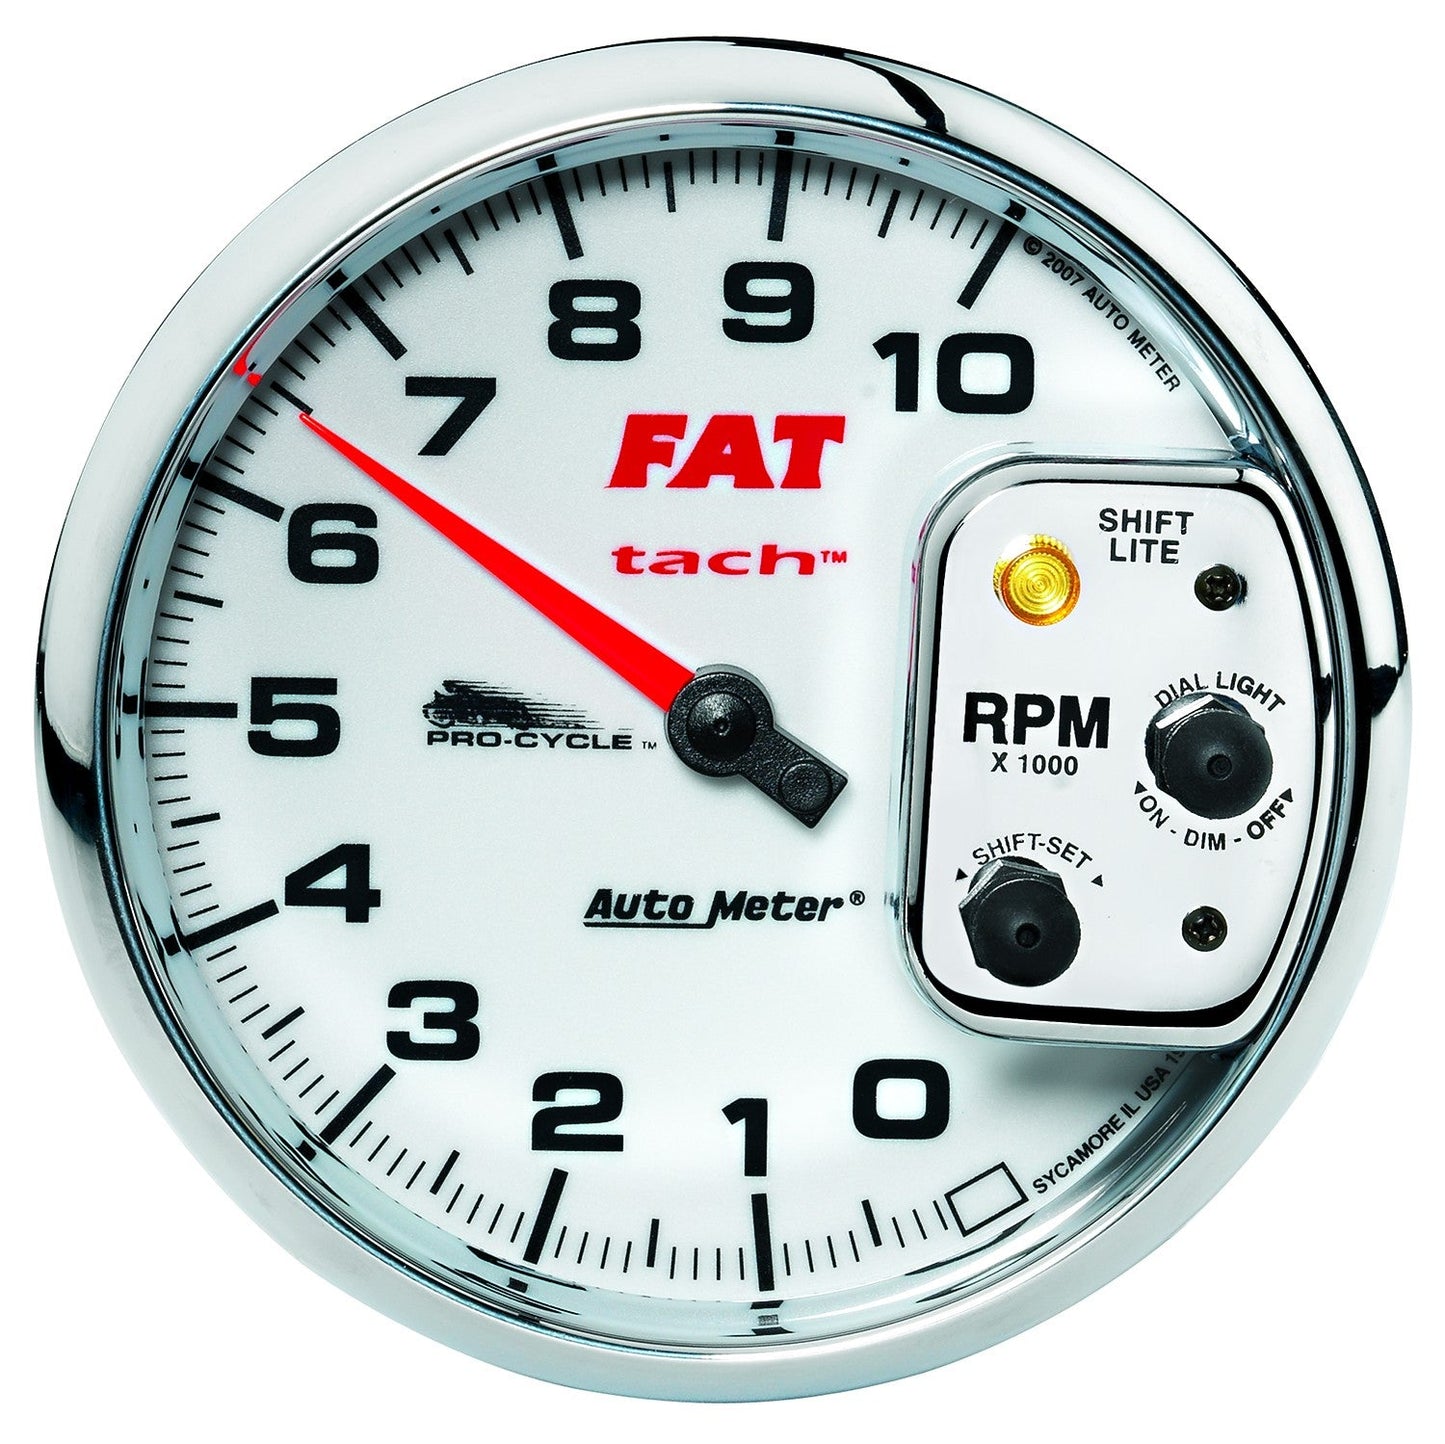 AutoMeter - 5" TACHOMETER, 0-10,000 RPM, WHITE, PRO-CYCLE (19265)